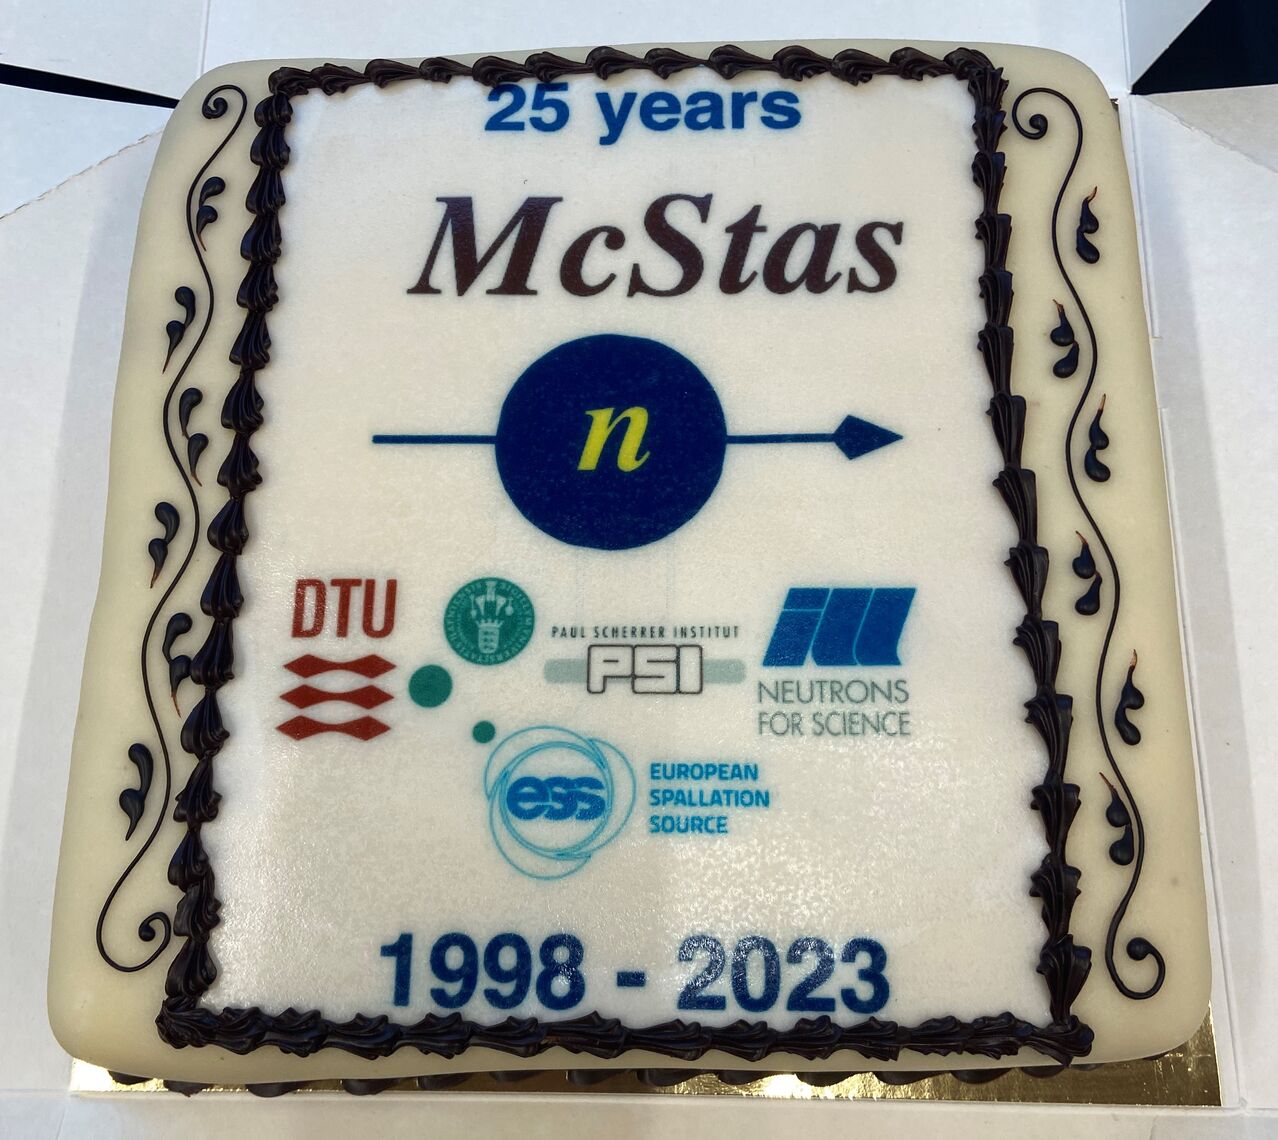 A cake, with McStas and all the partner logos written in the icing